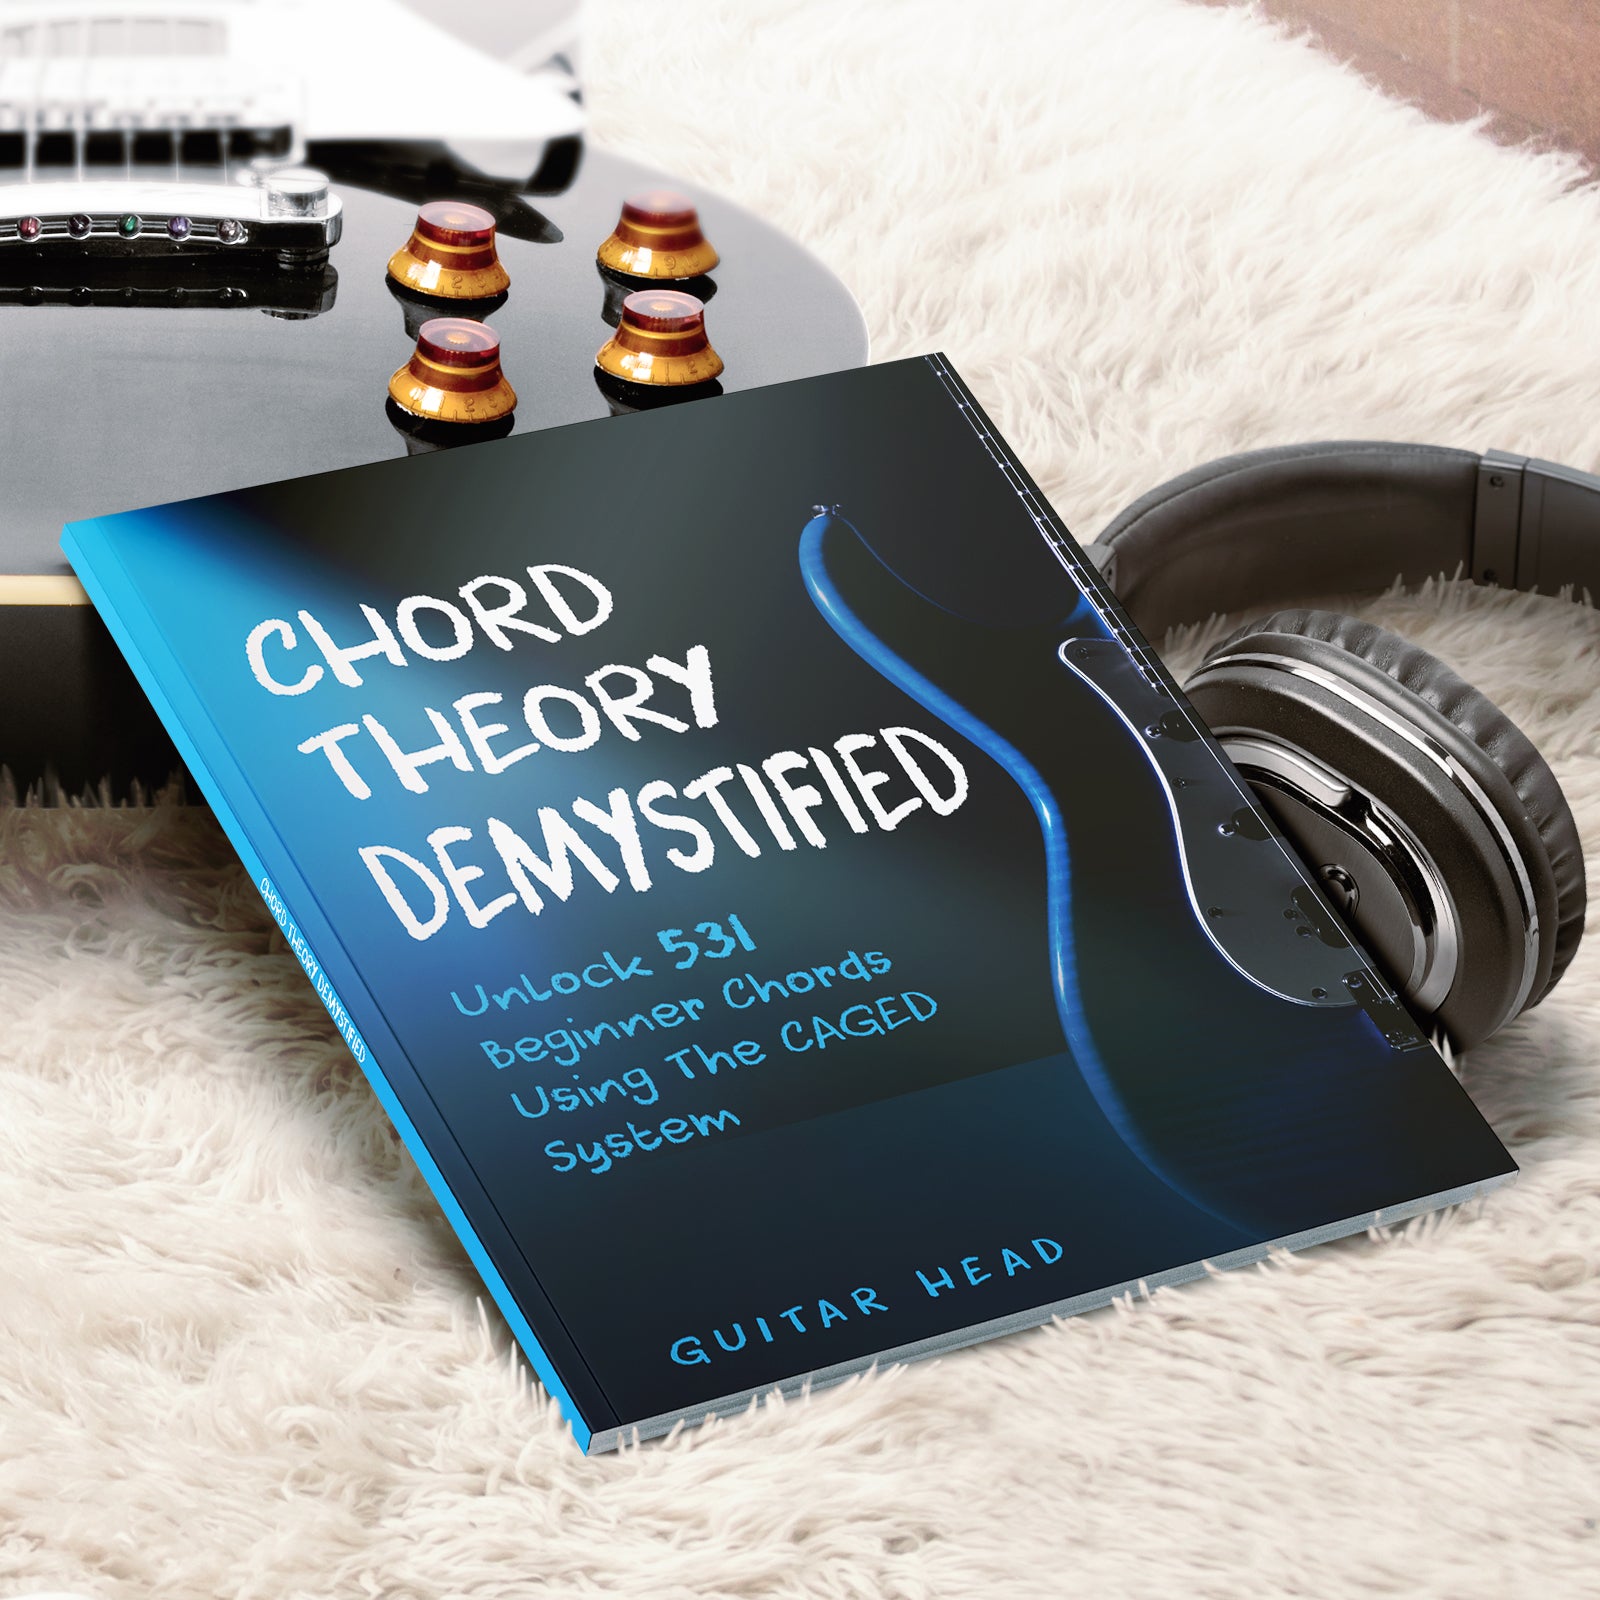 Chord Theory Demystified: Unlock 531 Beginner Chords Using The CAGED System And Practical Examples [Book]